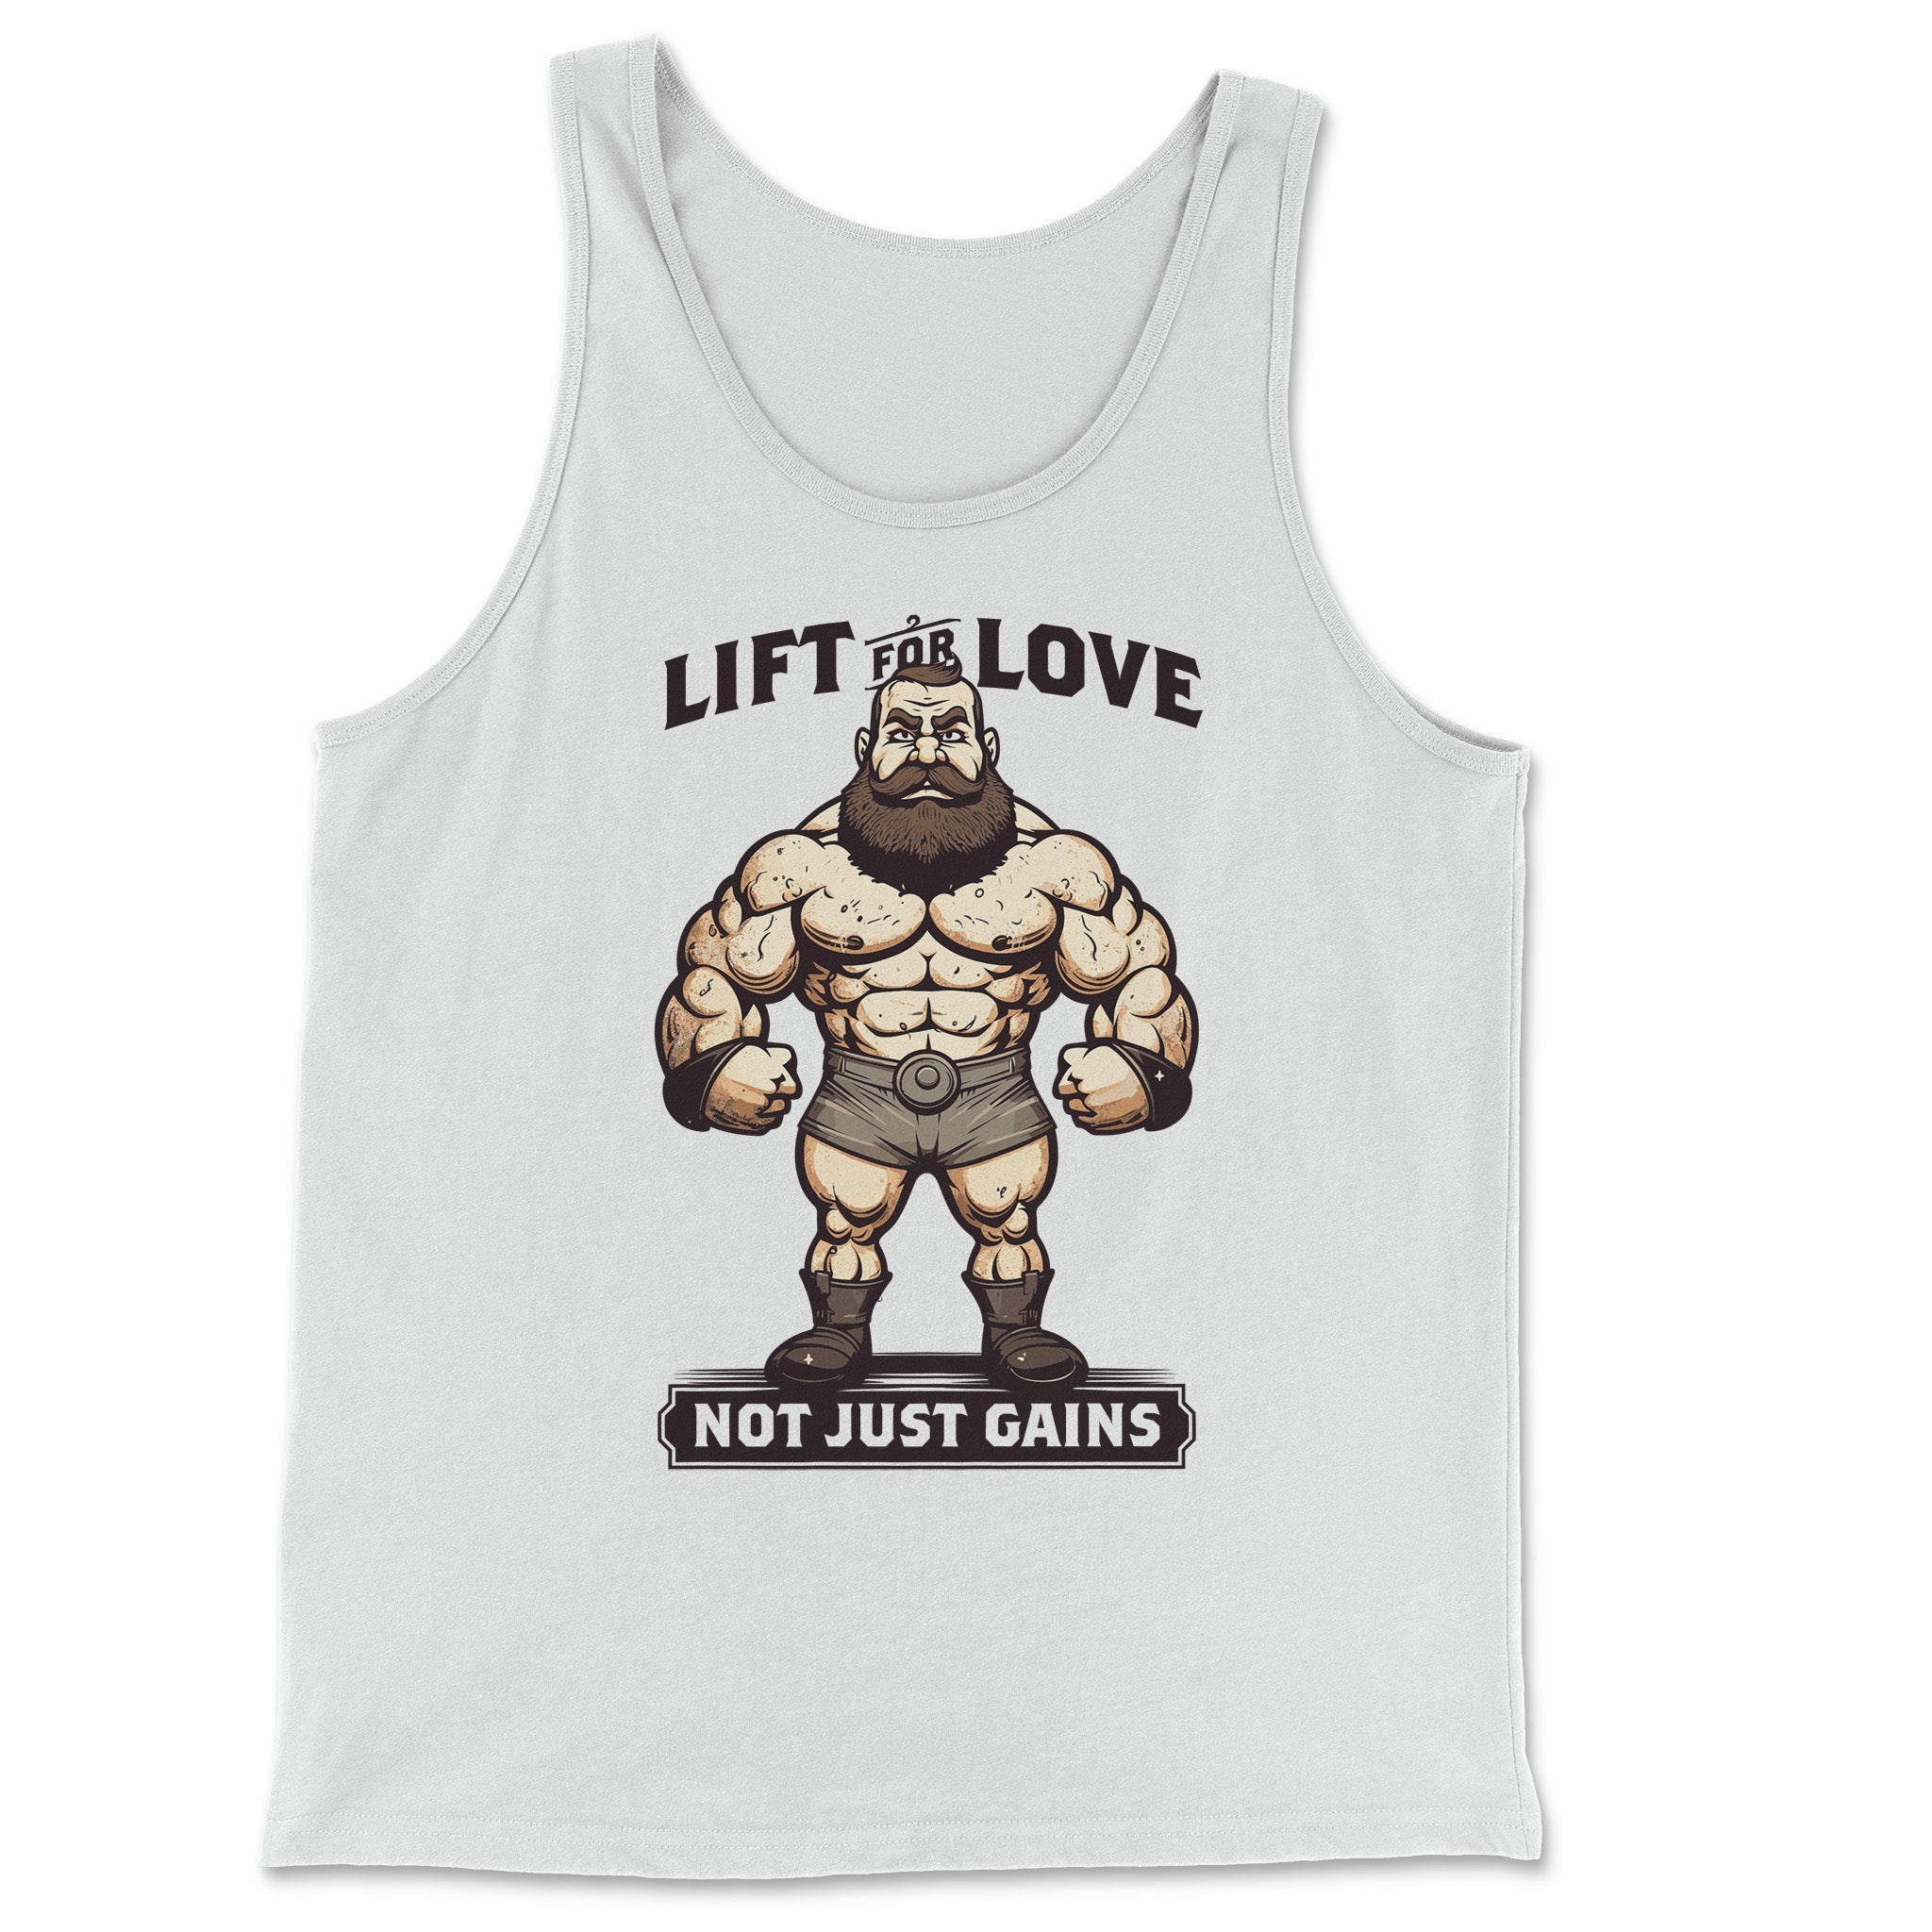 "Lift for Love, Not Just Gains" Muscular Man Tank Top - Hunky Tops